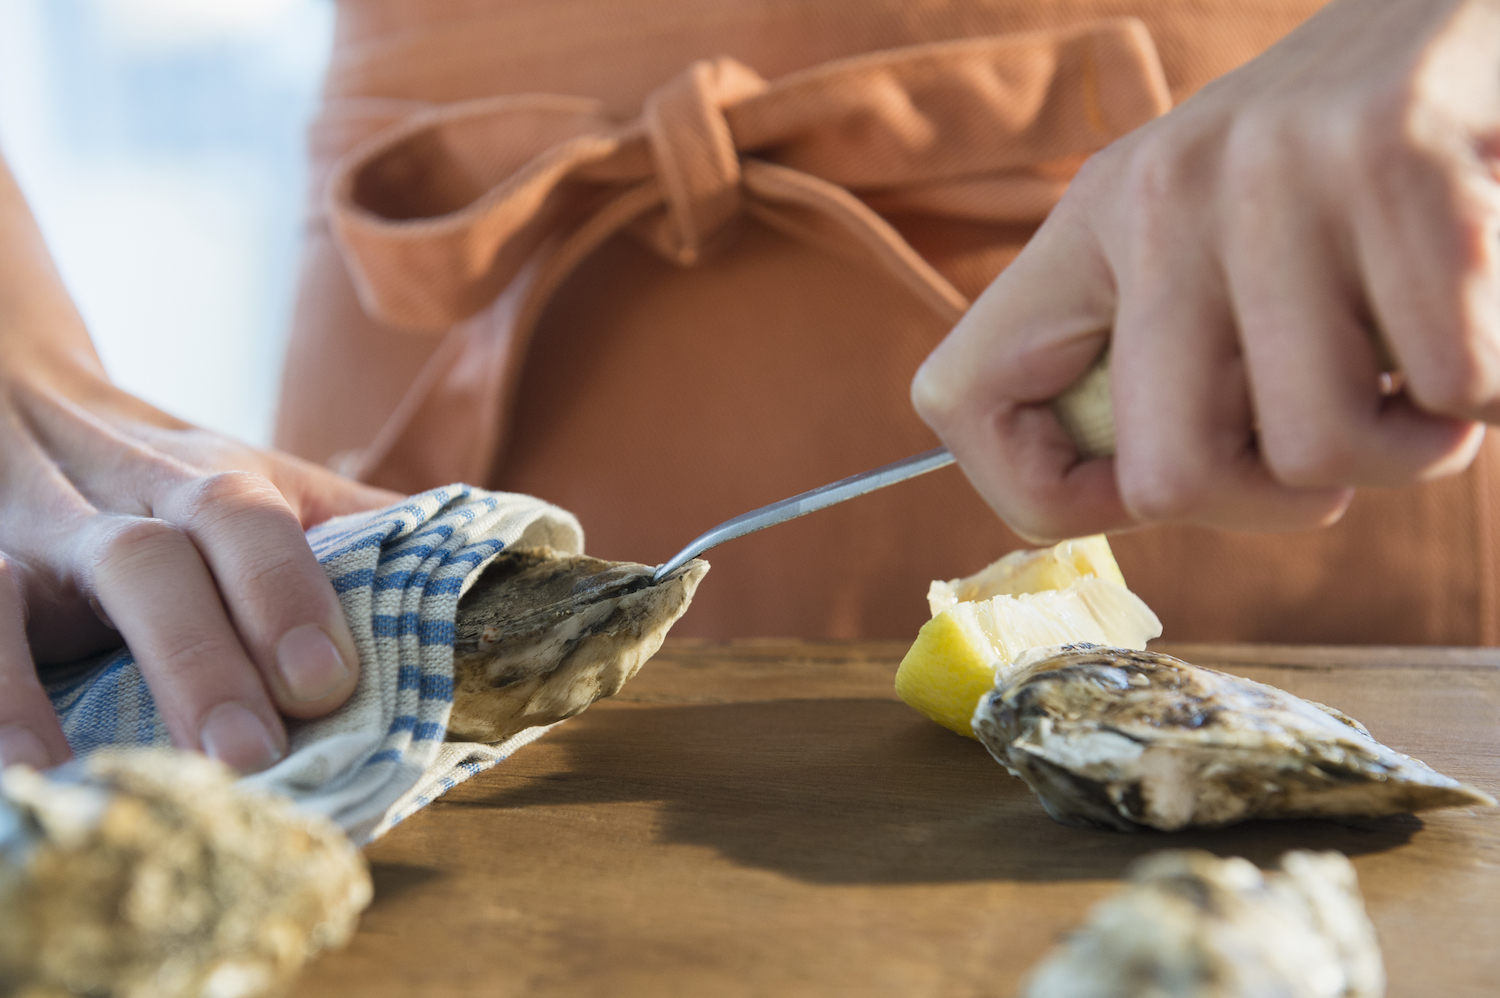 Woman in an orange apron shucking oysters